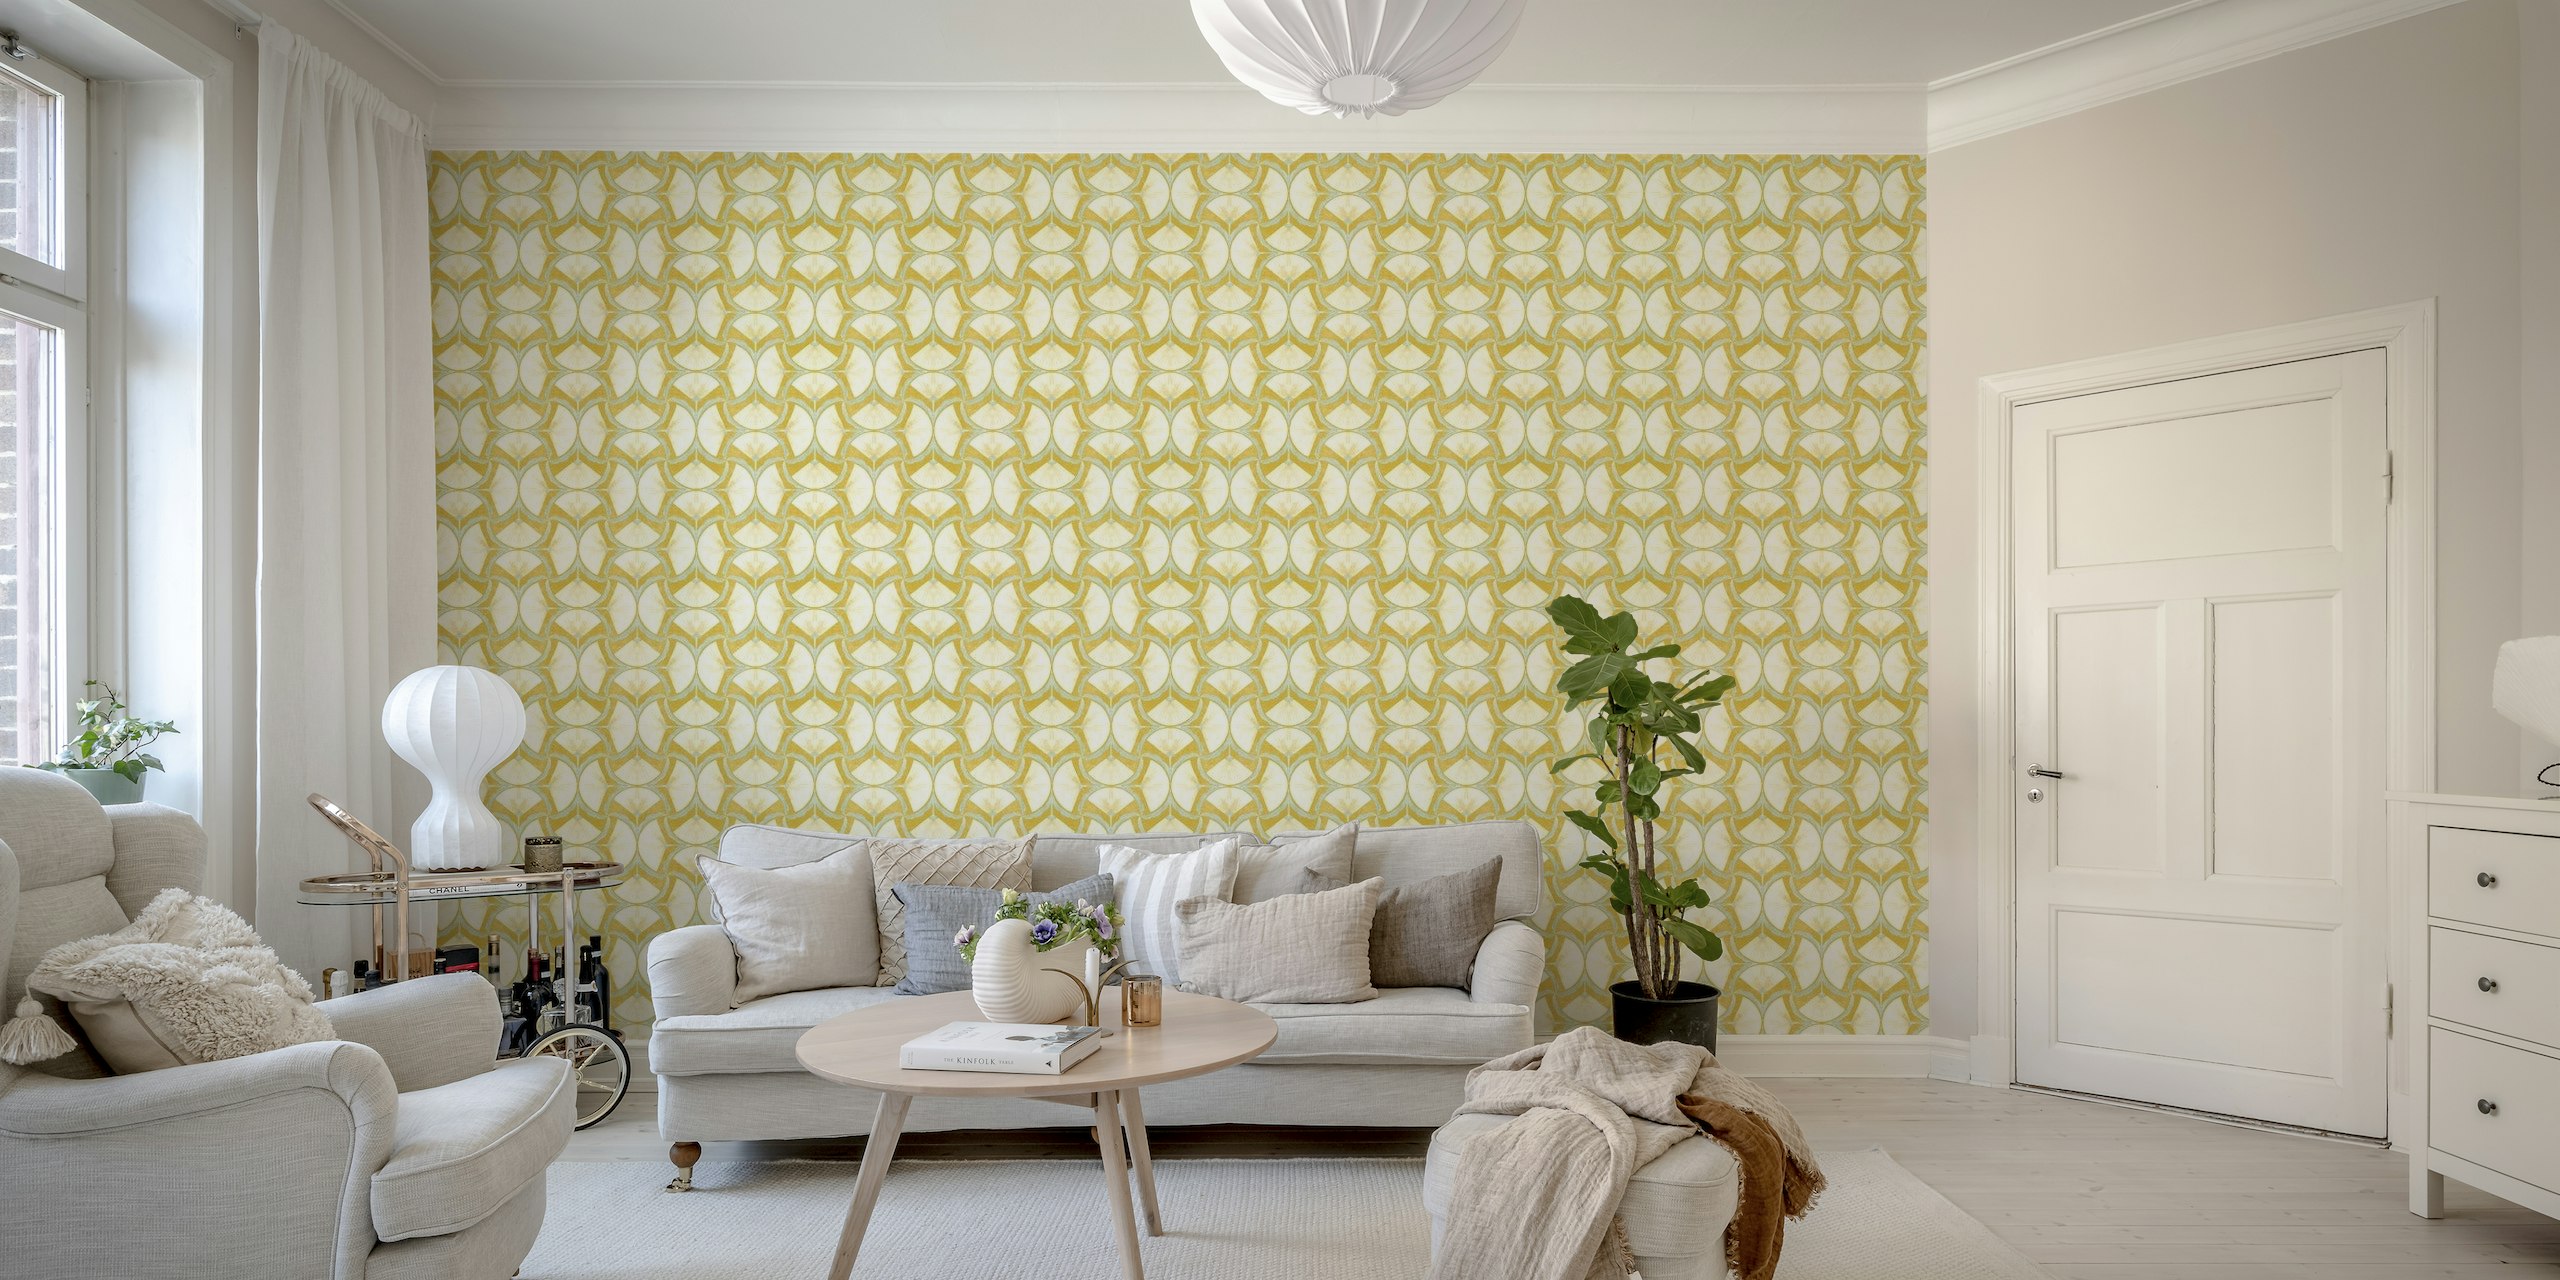 Floral Harmony: Delicate Hand-Drawn Symmetry on mustard background tapetit